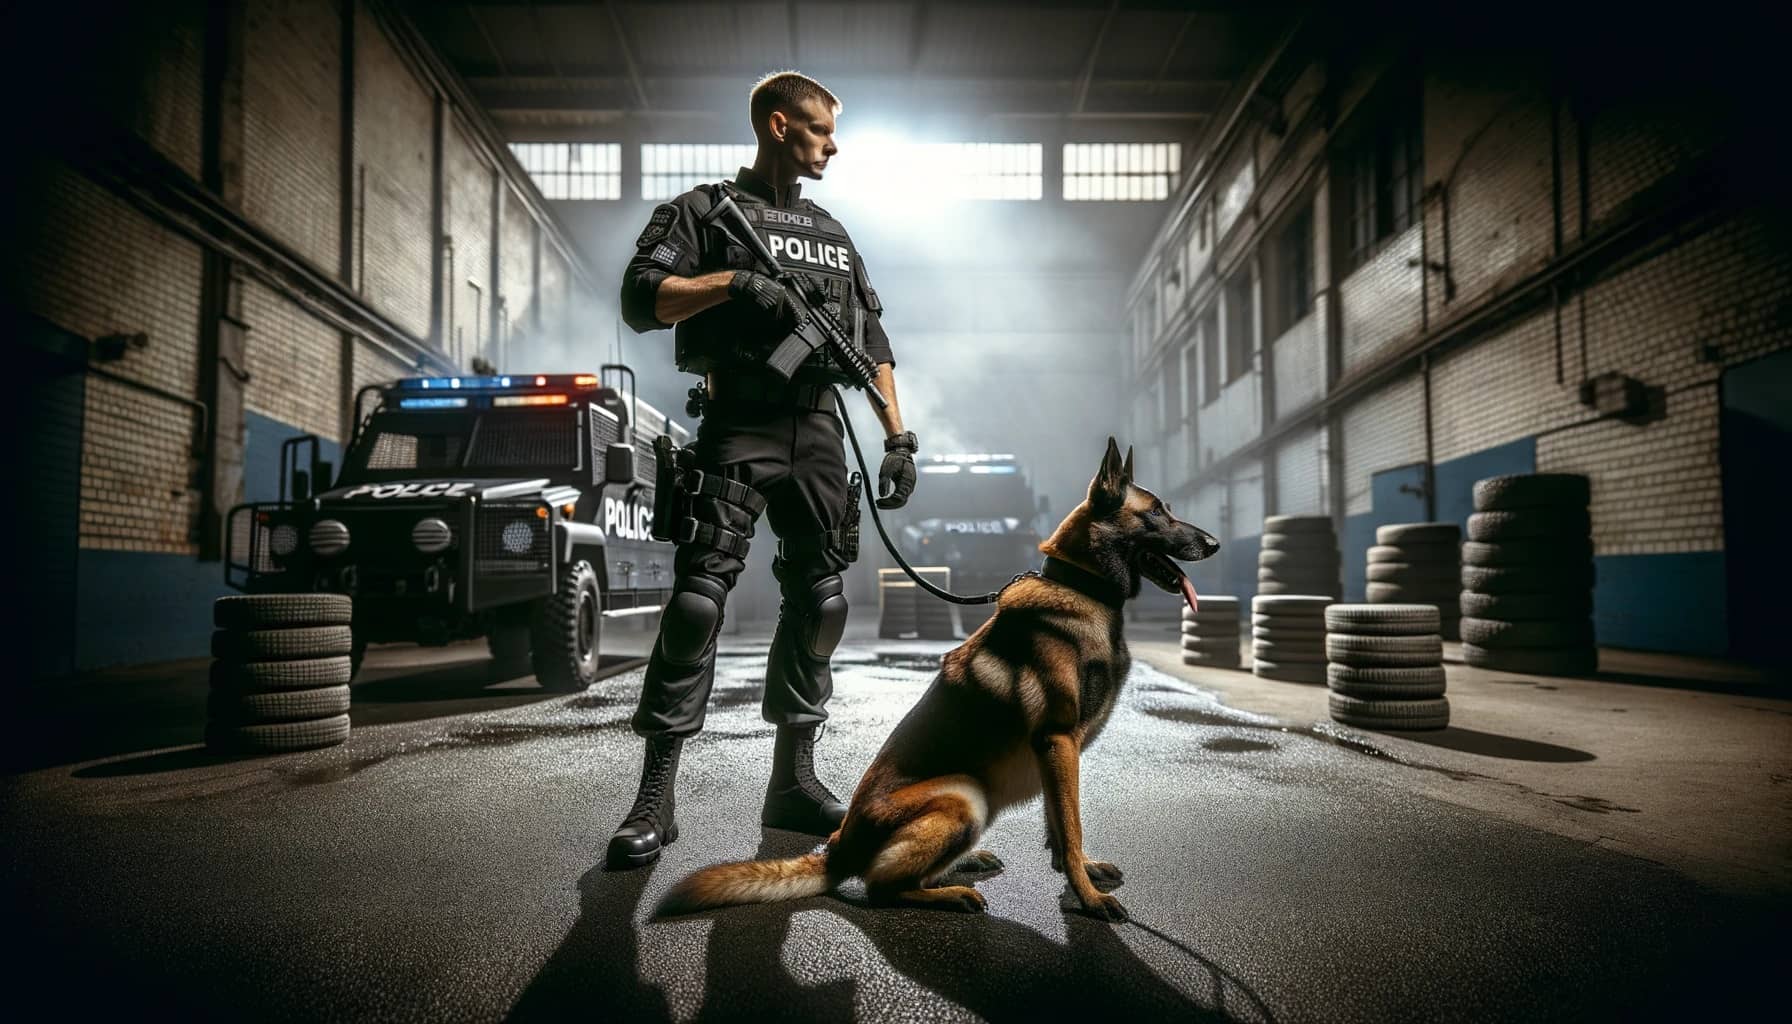 highly-trained Belgian Malinois police dog and its handler ready for action in an urban police K-9 training facility